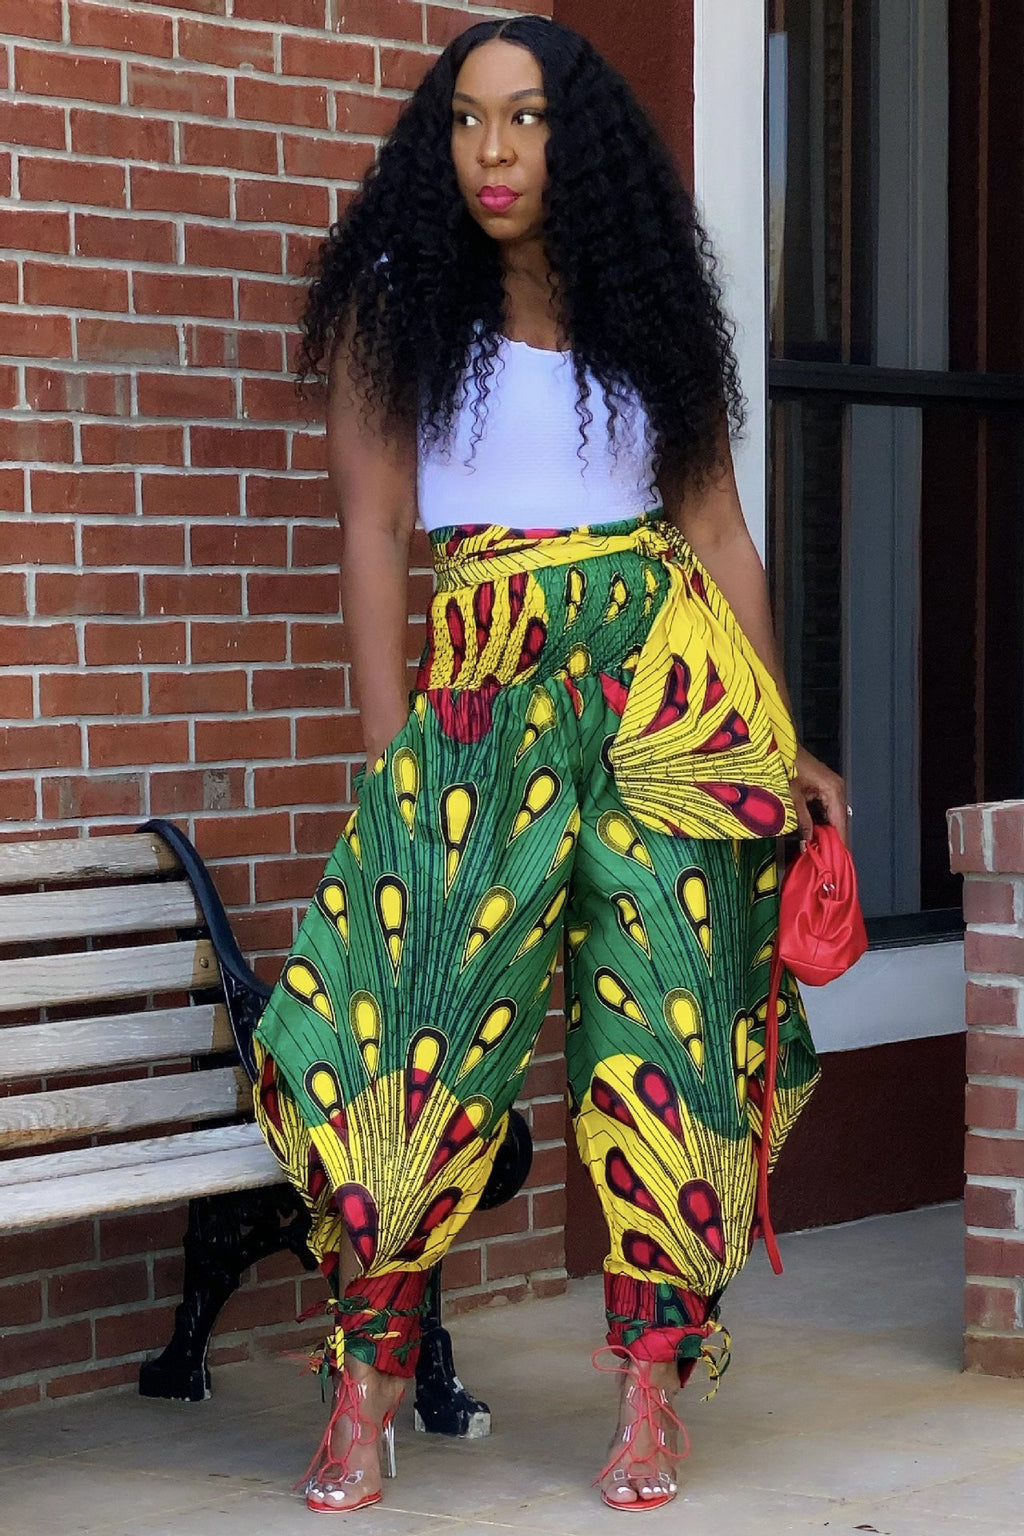 Plus Size Women Green & Yellow African Print Harem Pants High Waist Full Length w/ Ankle Bows